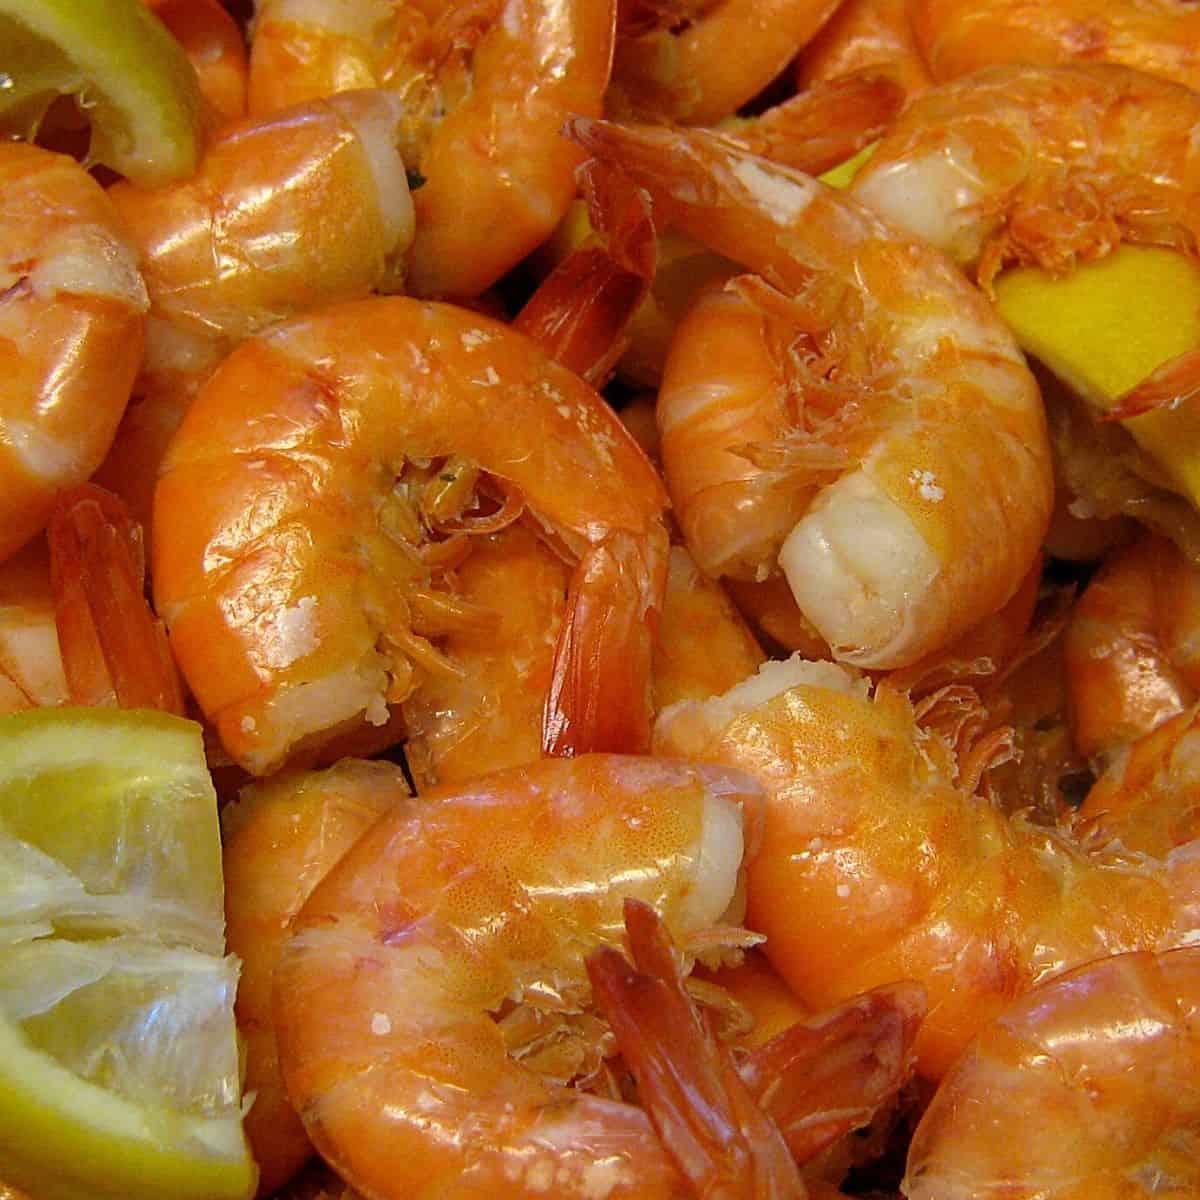 A batch of shrimp mixed with lemon slices.